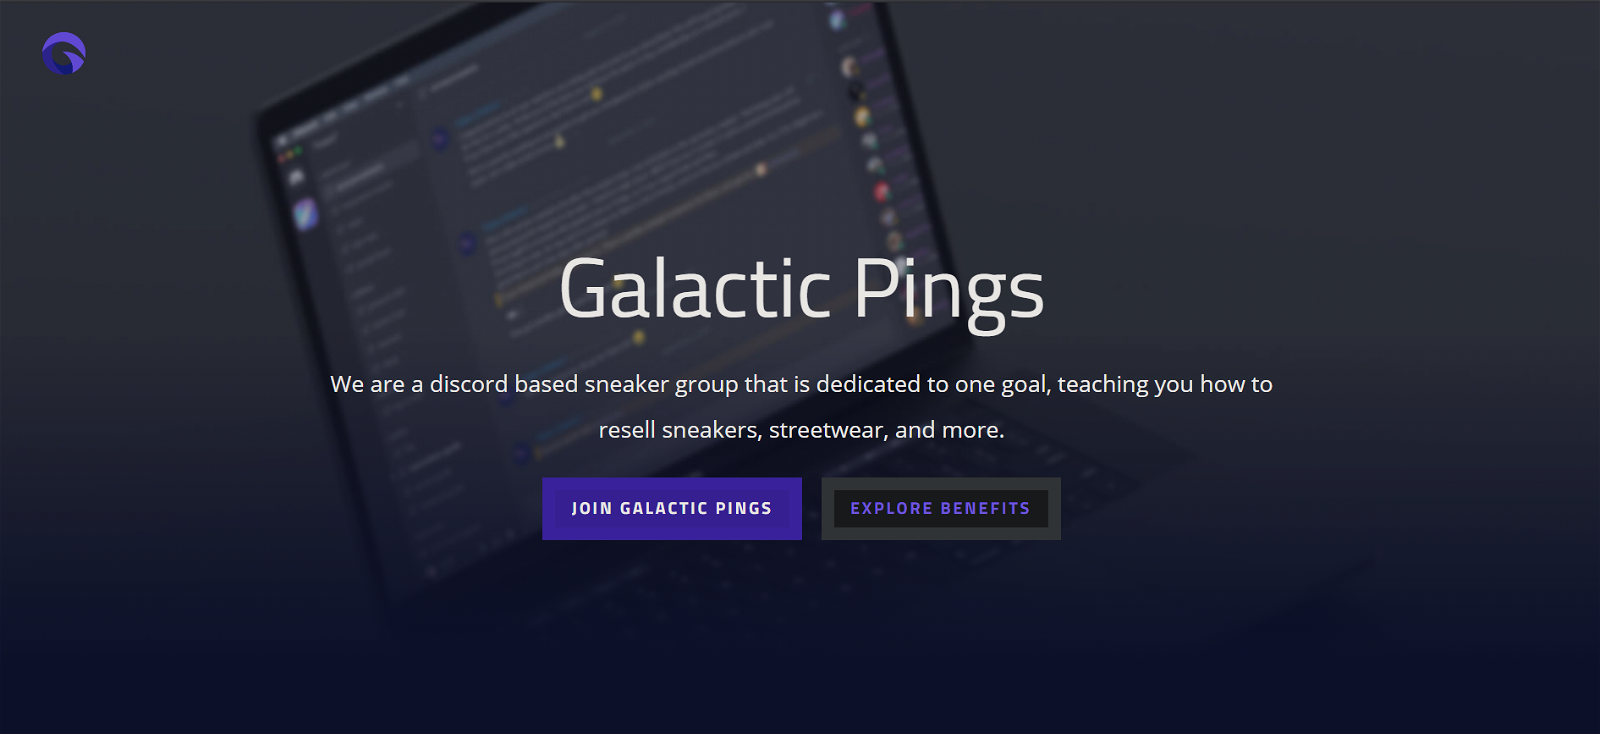 Galactic Pings cook group presentation banner